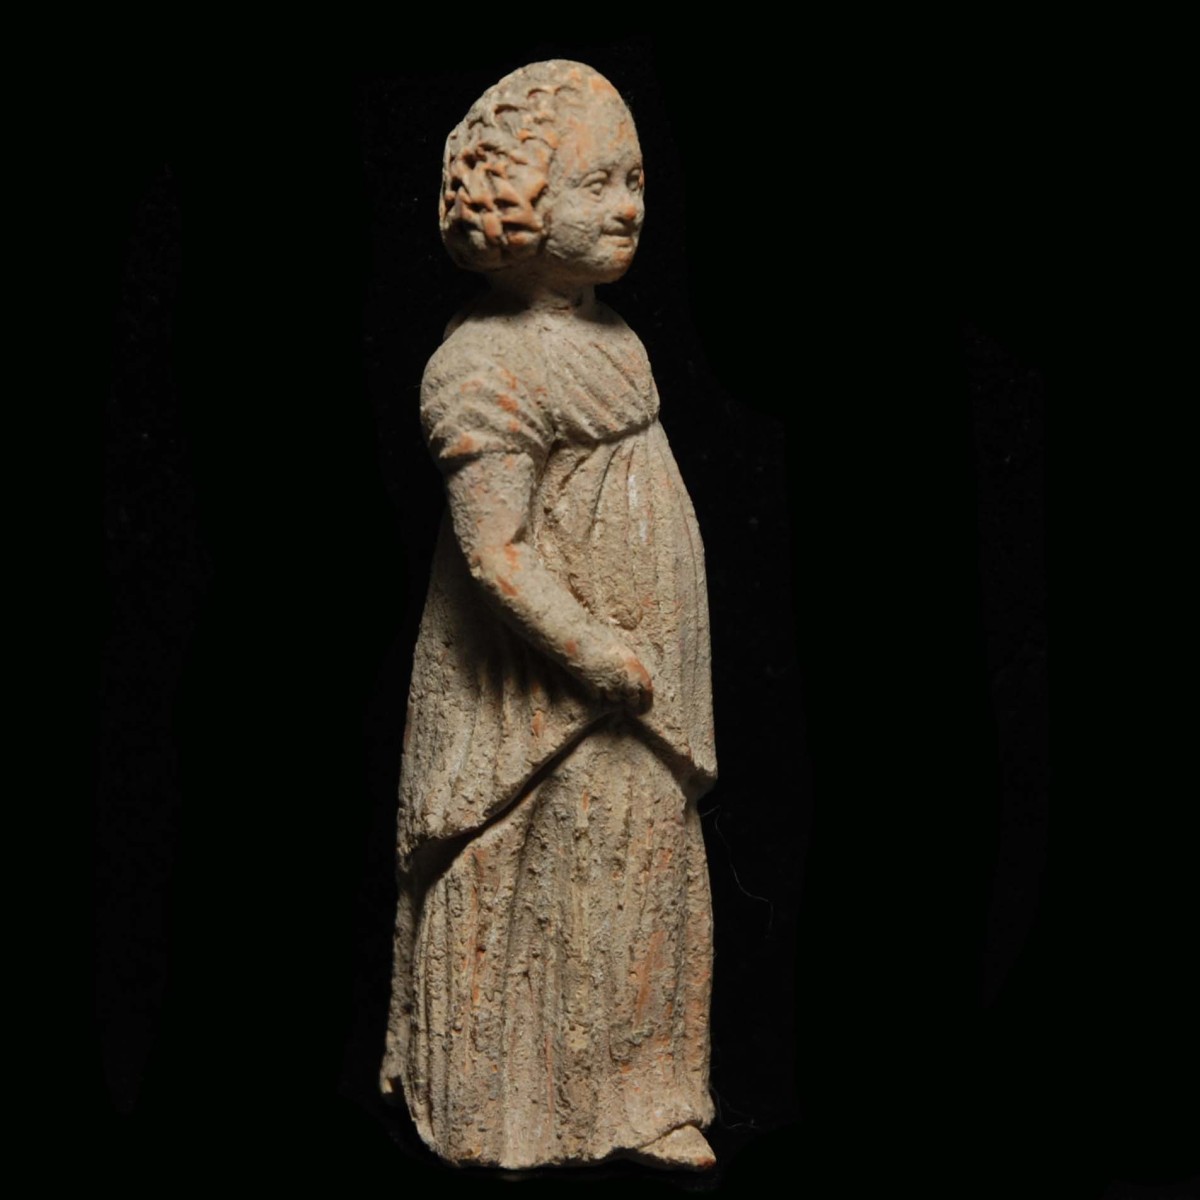 Tanagra statuette of a young girl right